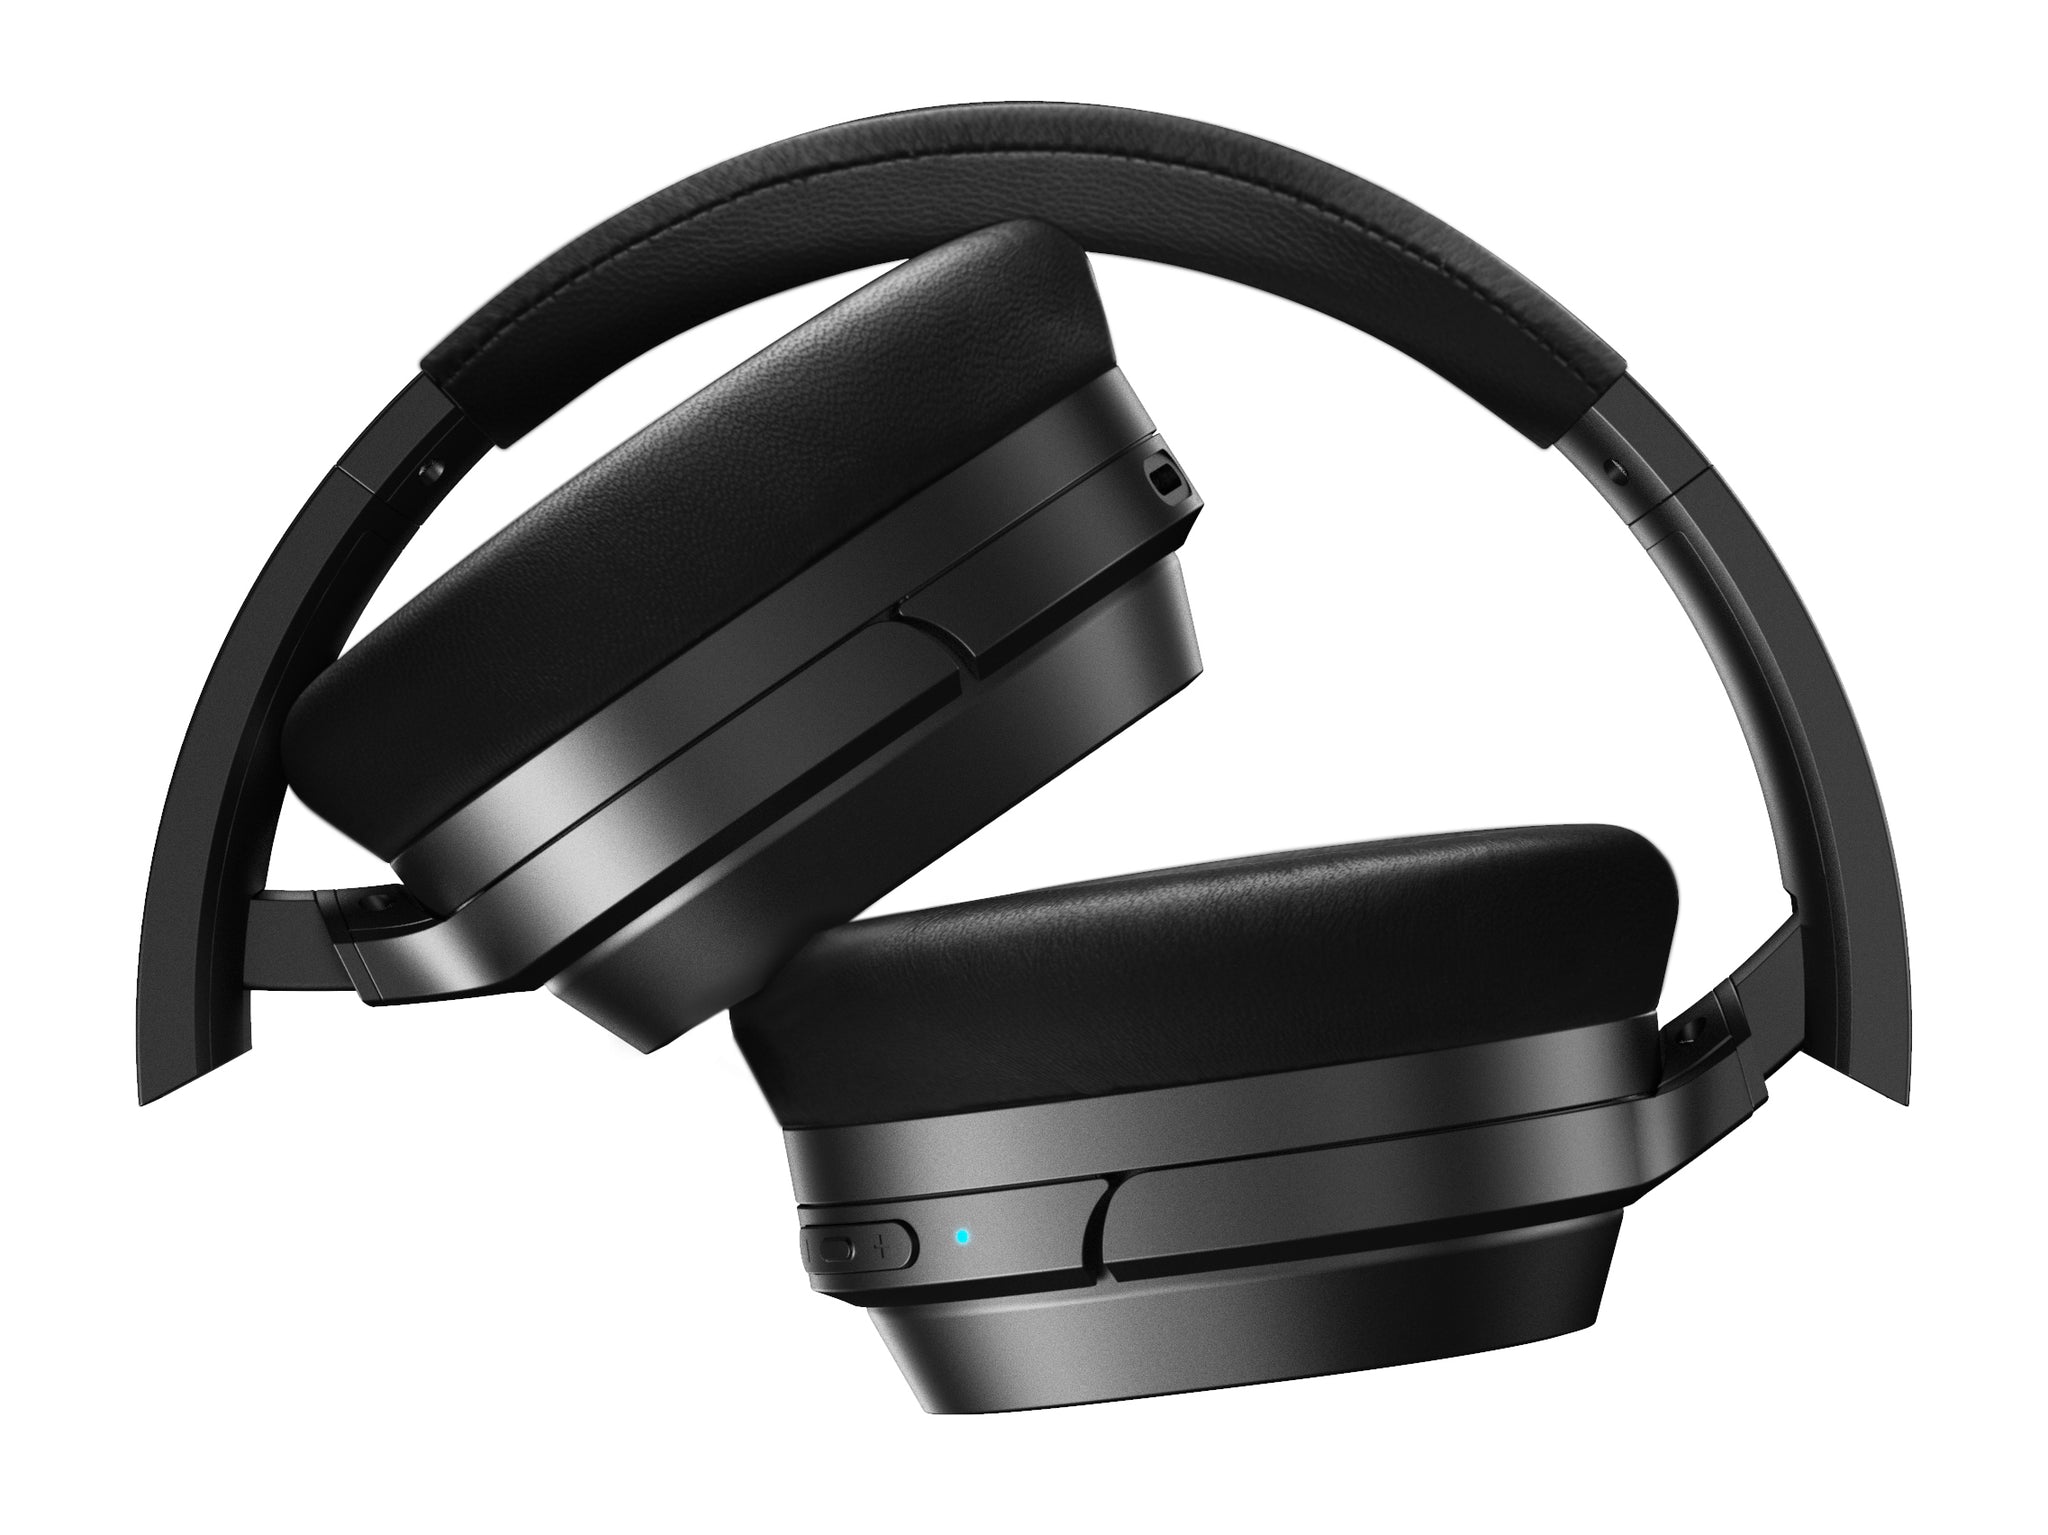 Edifier STAX SPIRIT S3 Bluetooth Planar Magnetic Headphones With Microphone, Hi-Res Audio & Snapdragon Sound - Black